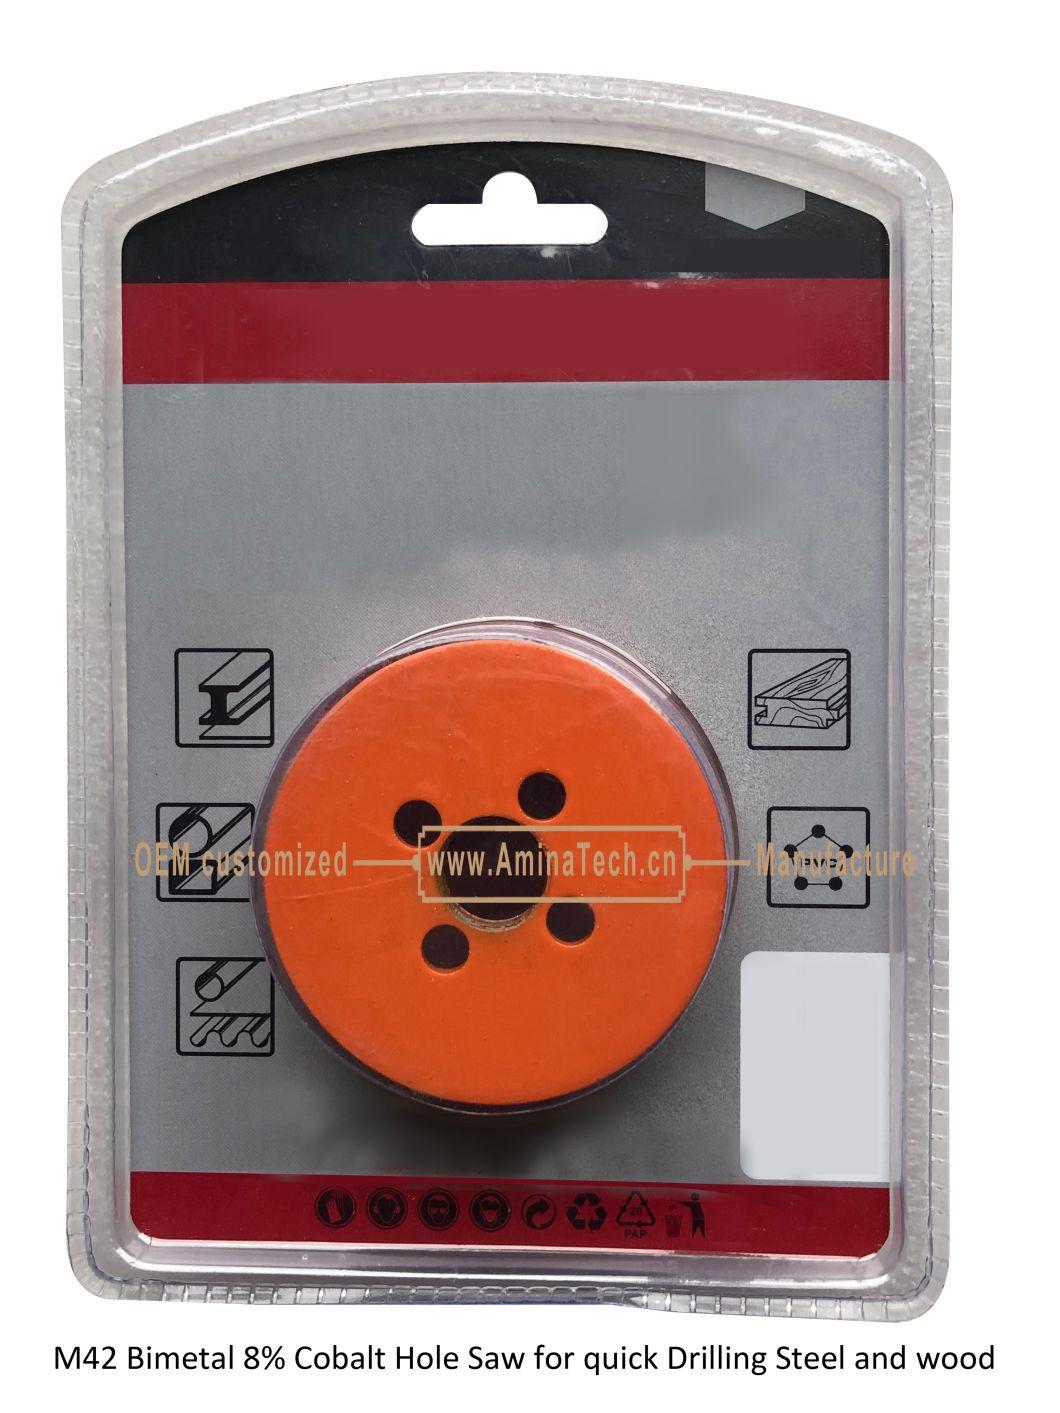 M42 Bimetal 8% Cobalt Hole Saw for quick Drilling Steel and wood,Power Tools